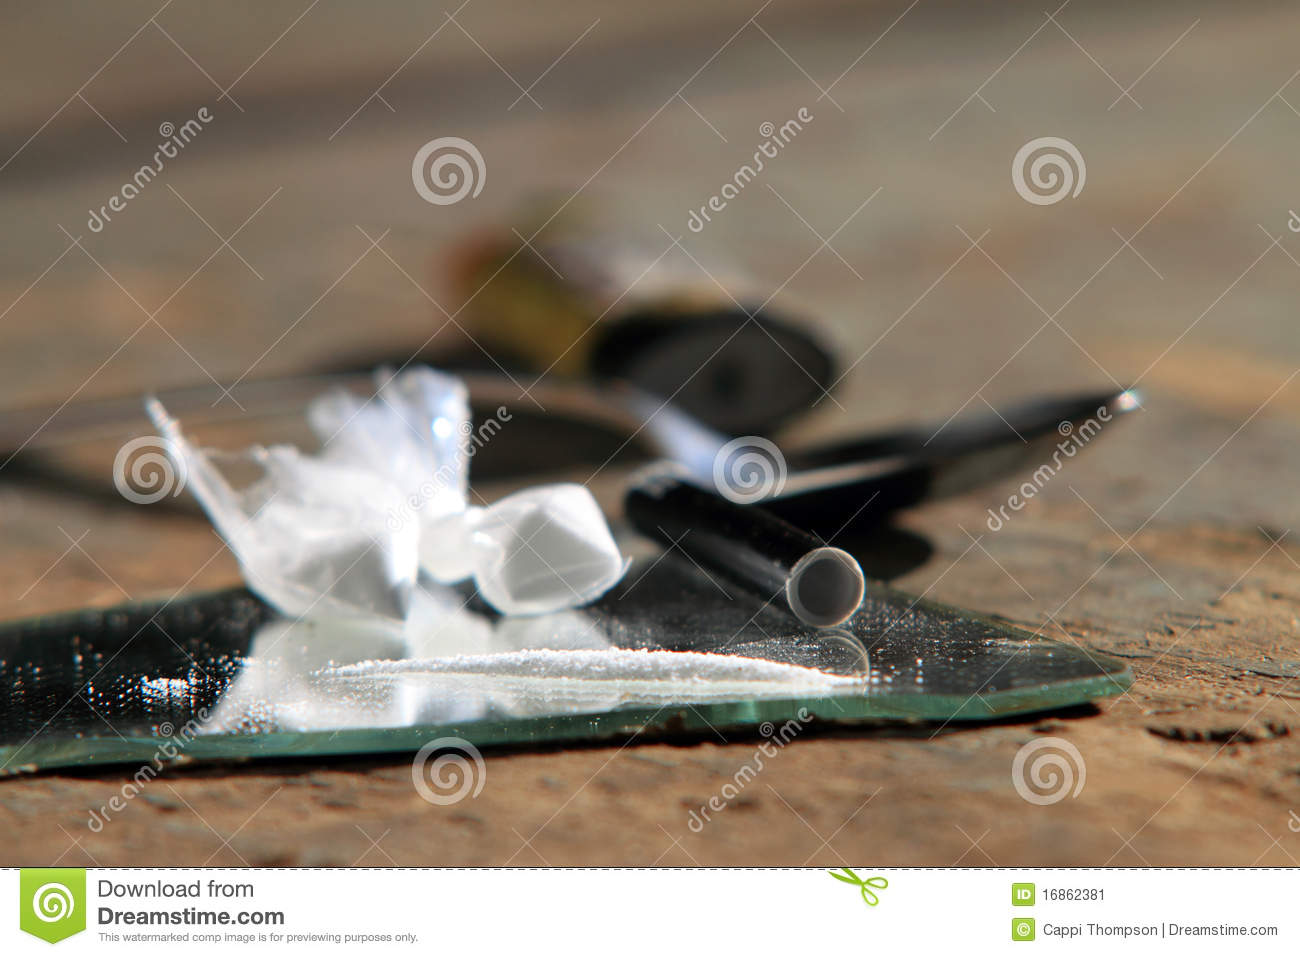 Line Of Cocaine Or Meth On Mirror With Baggies Straw And Spoon